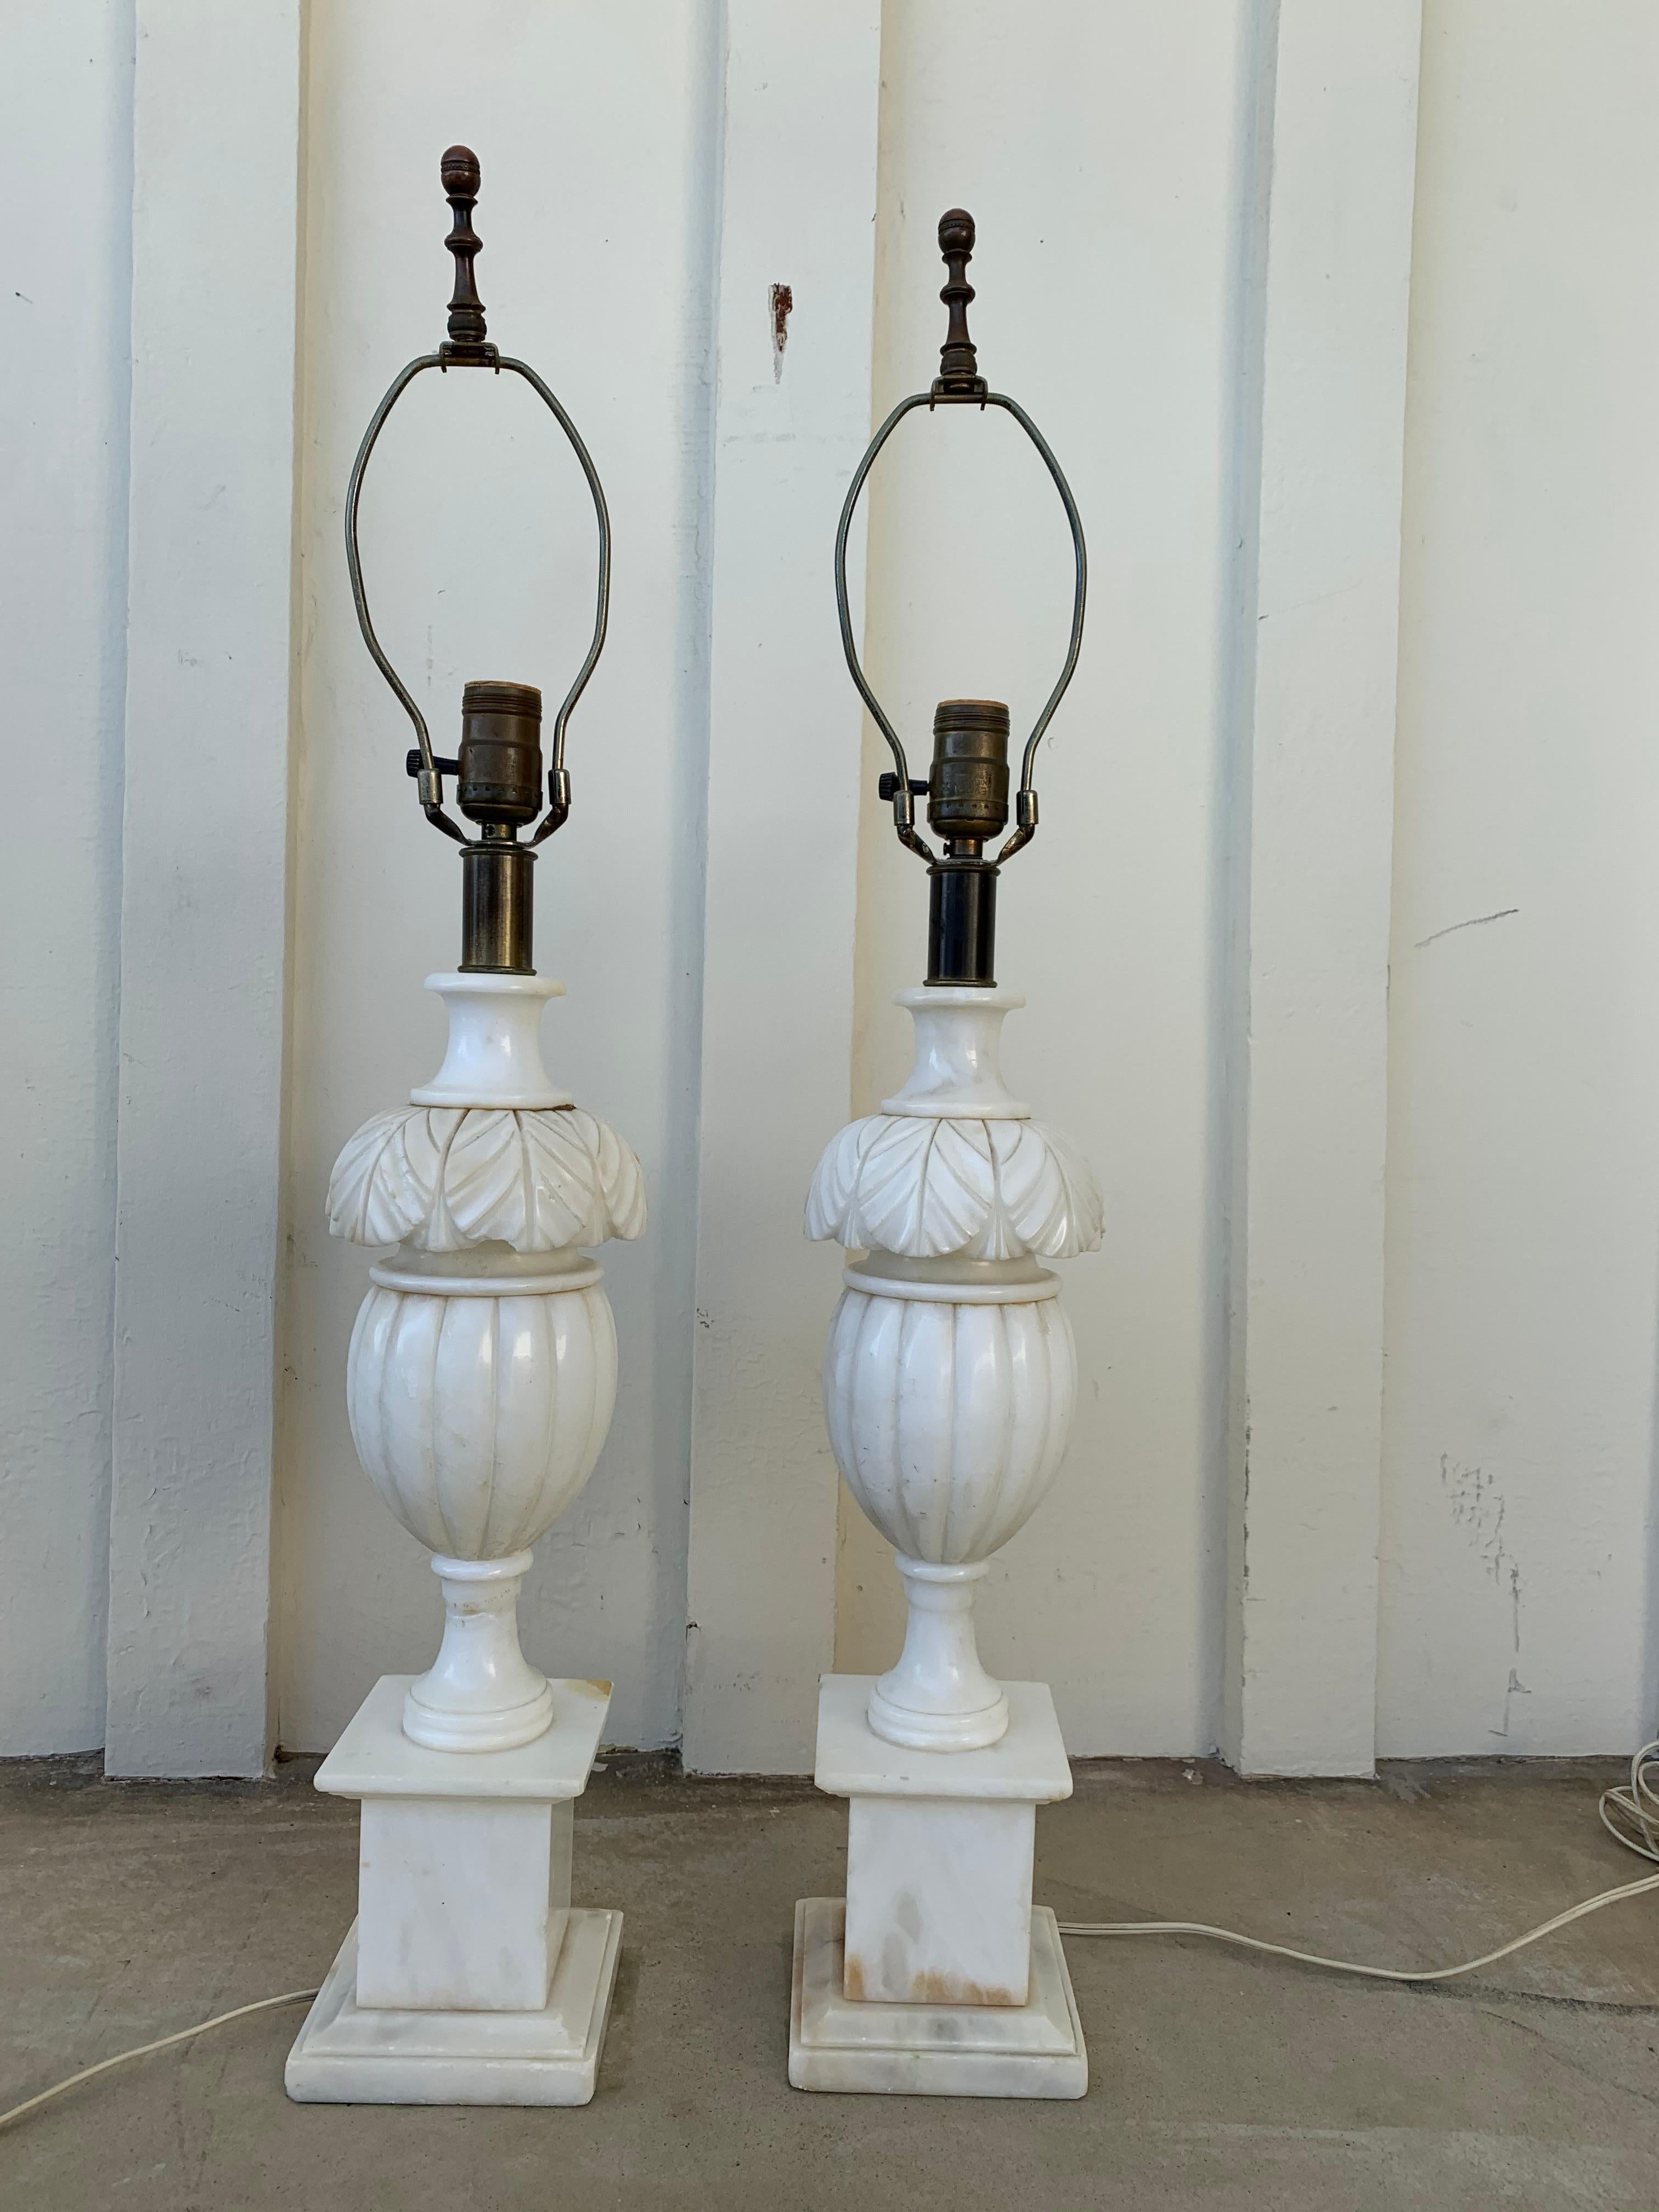 Beautiful pair of matching marble lamps with beautiful forms.The lamps are at least from the 50s and they have the original wiring. the lamps have not shades.

Meeasurements:
22 inches high from floor to top of light socket x 30.5 high to top of